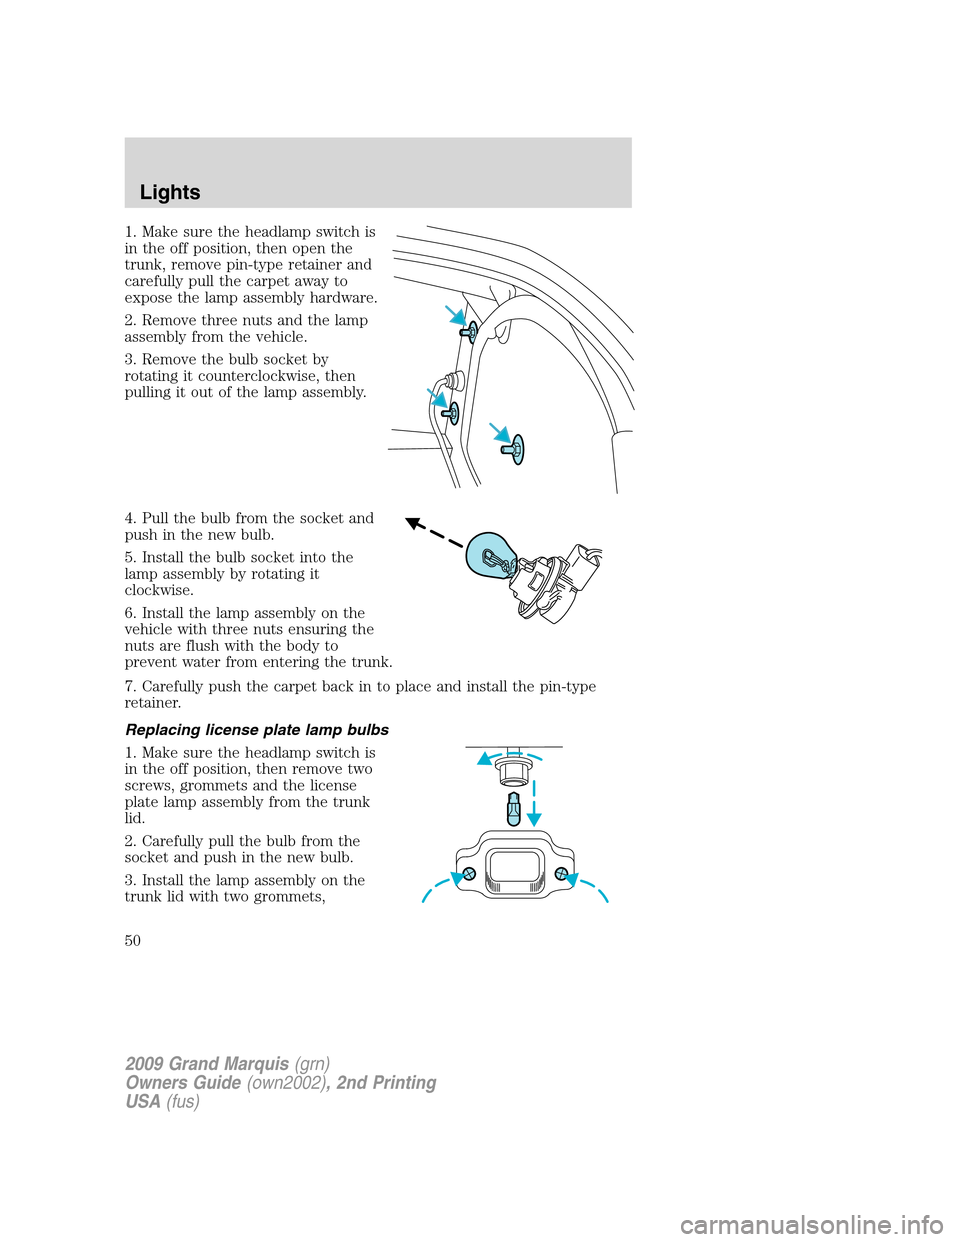 Mercury Grand Marquis 2009  Owners Manuals 1. Make sure the headlamp switch is
in the off position, then open the
trunk, remove pin-type retainer and
carefully pull the carpet away to
expose the lamp assembly hardware.
2. Remove three nuts and